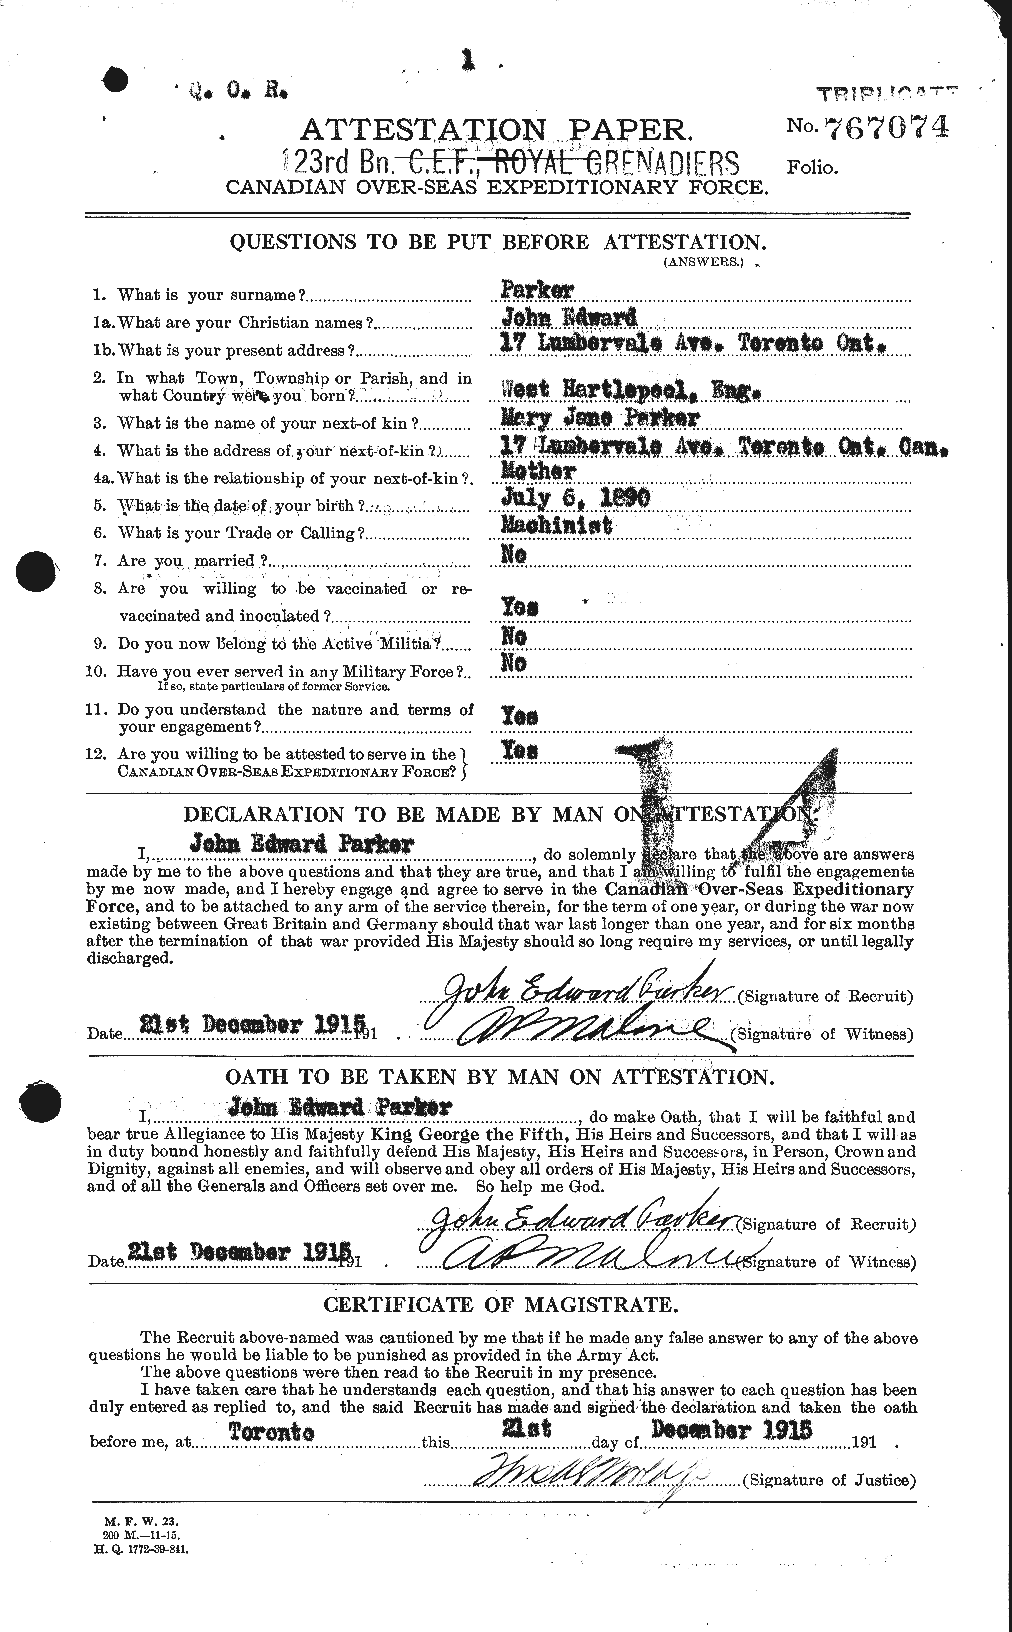 Personnel Records of the First World War - CEF 565465a